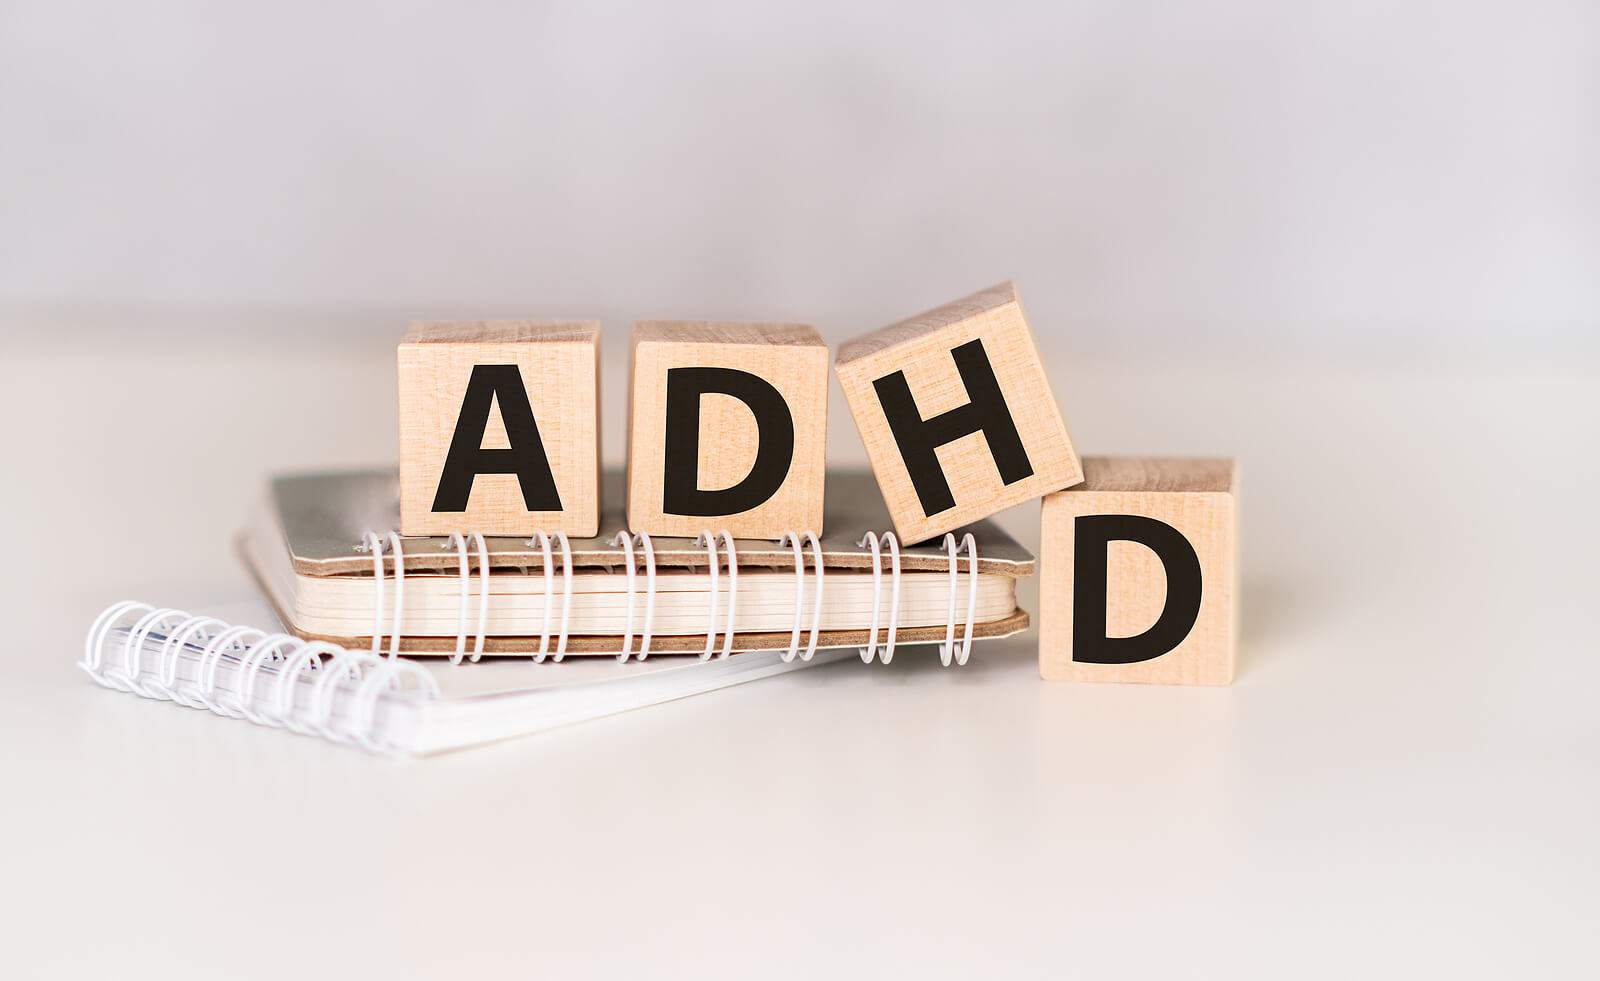 ADHD letters on wooden blocks. Neurodevelopmental screenings in Campbell, CA can support your child in many ways. Learn more from our caring psychologists here.